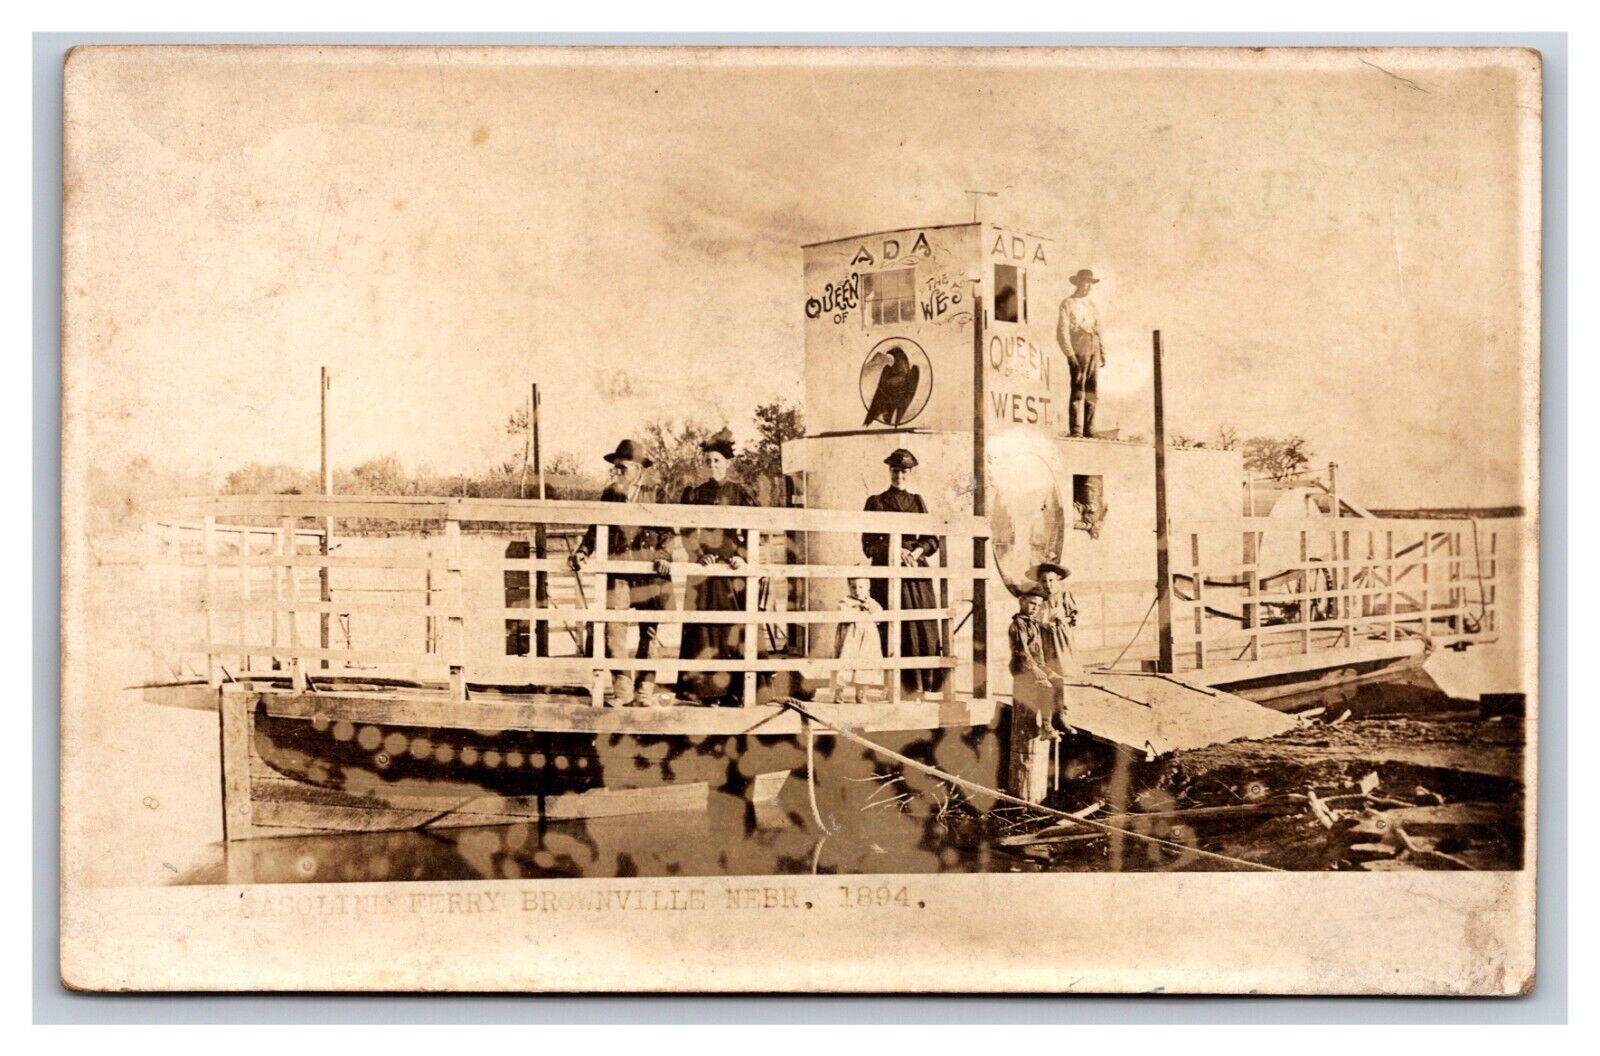 RPPC Queen of the West Gasoline Ferry 1894 Brownville NE Grossoehme Postcard S18